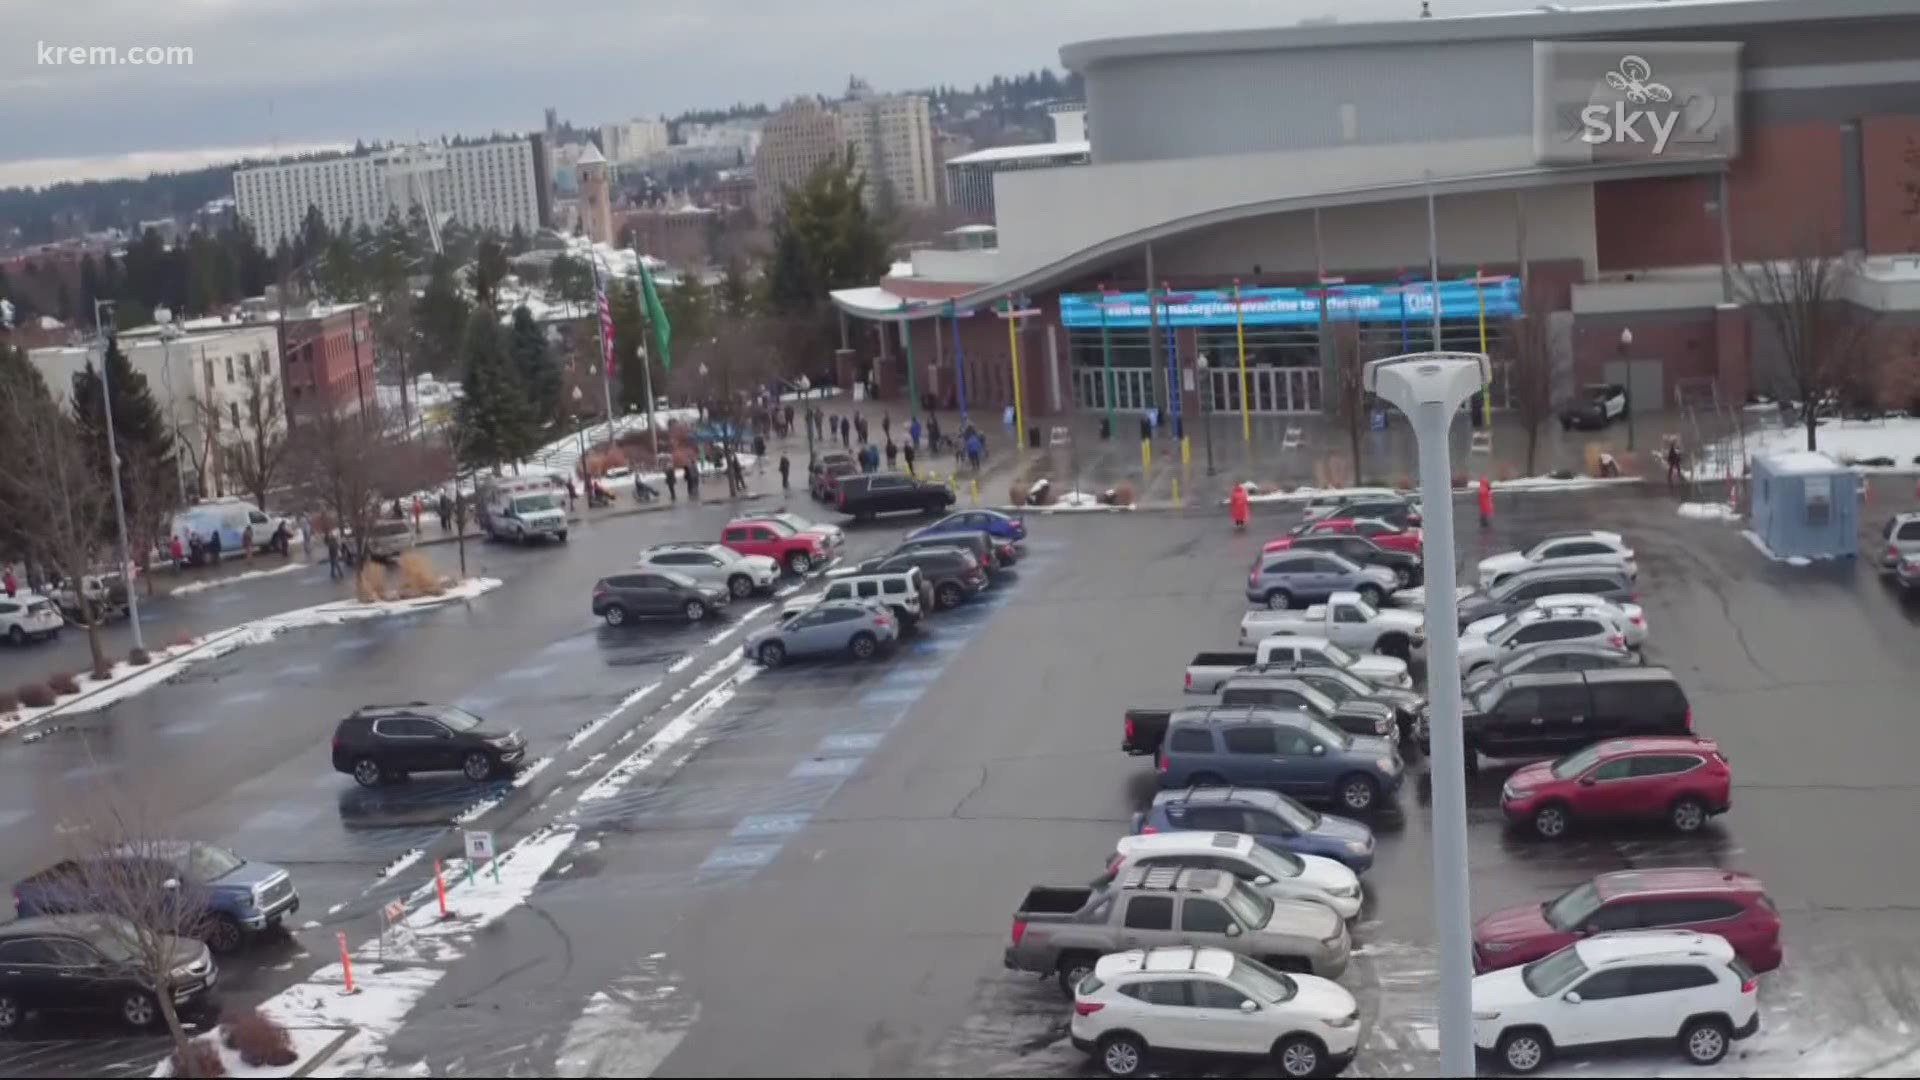 The Washington State Department of Health will likely be leading operations at the Spokane Arena mass COVID-19 vaccination clinic by March 1.